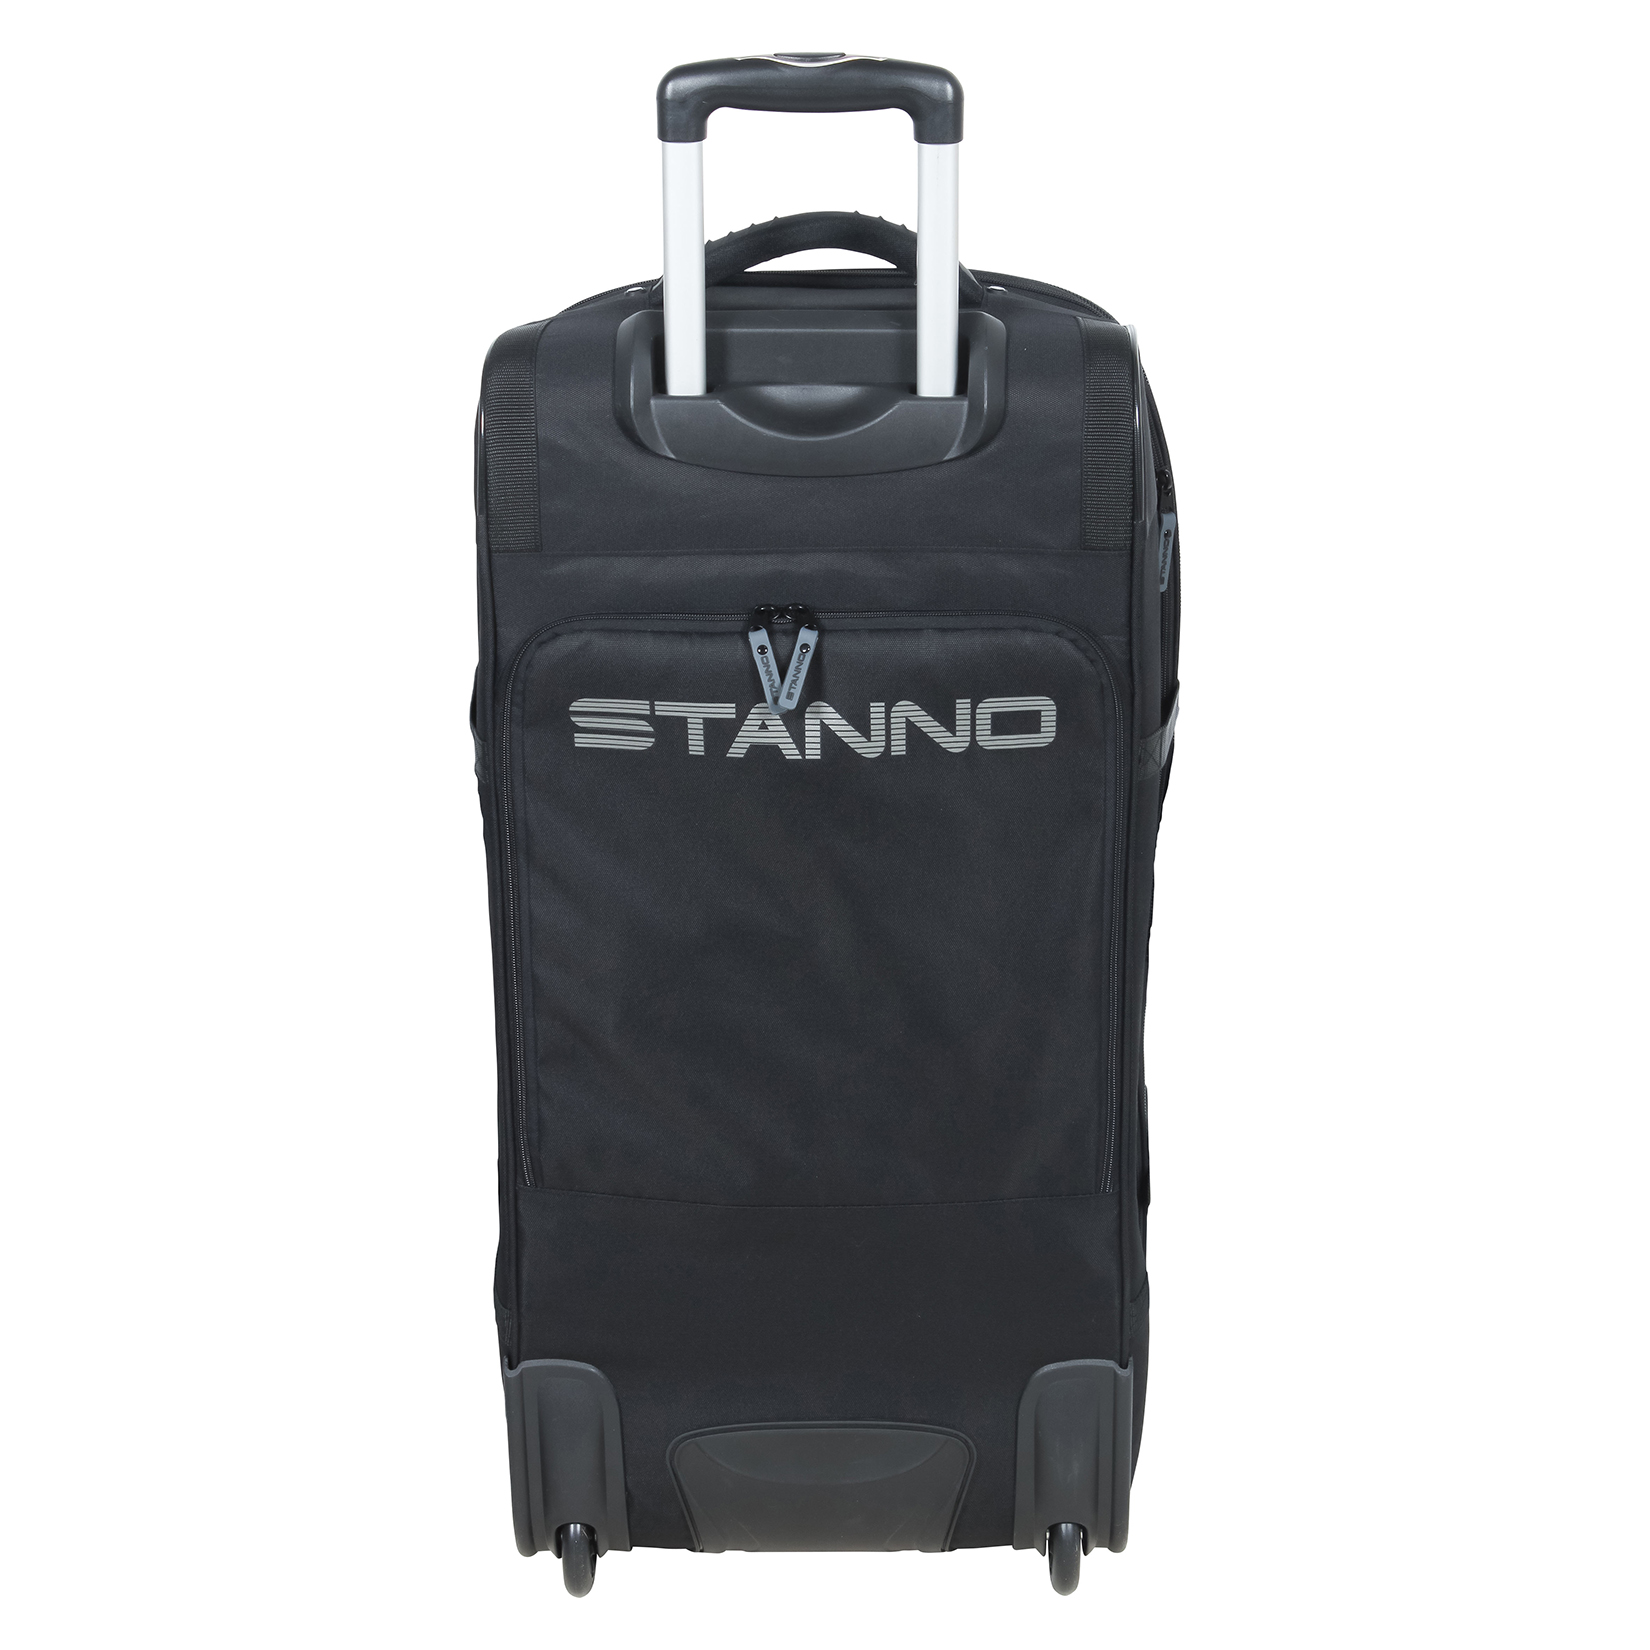 Stanno Trolley Bag Large